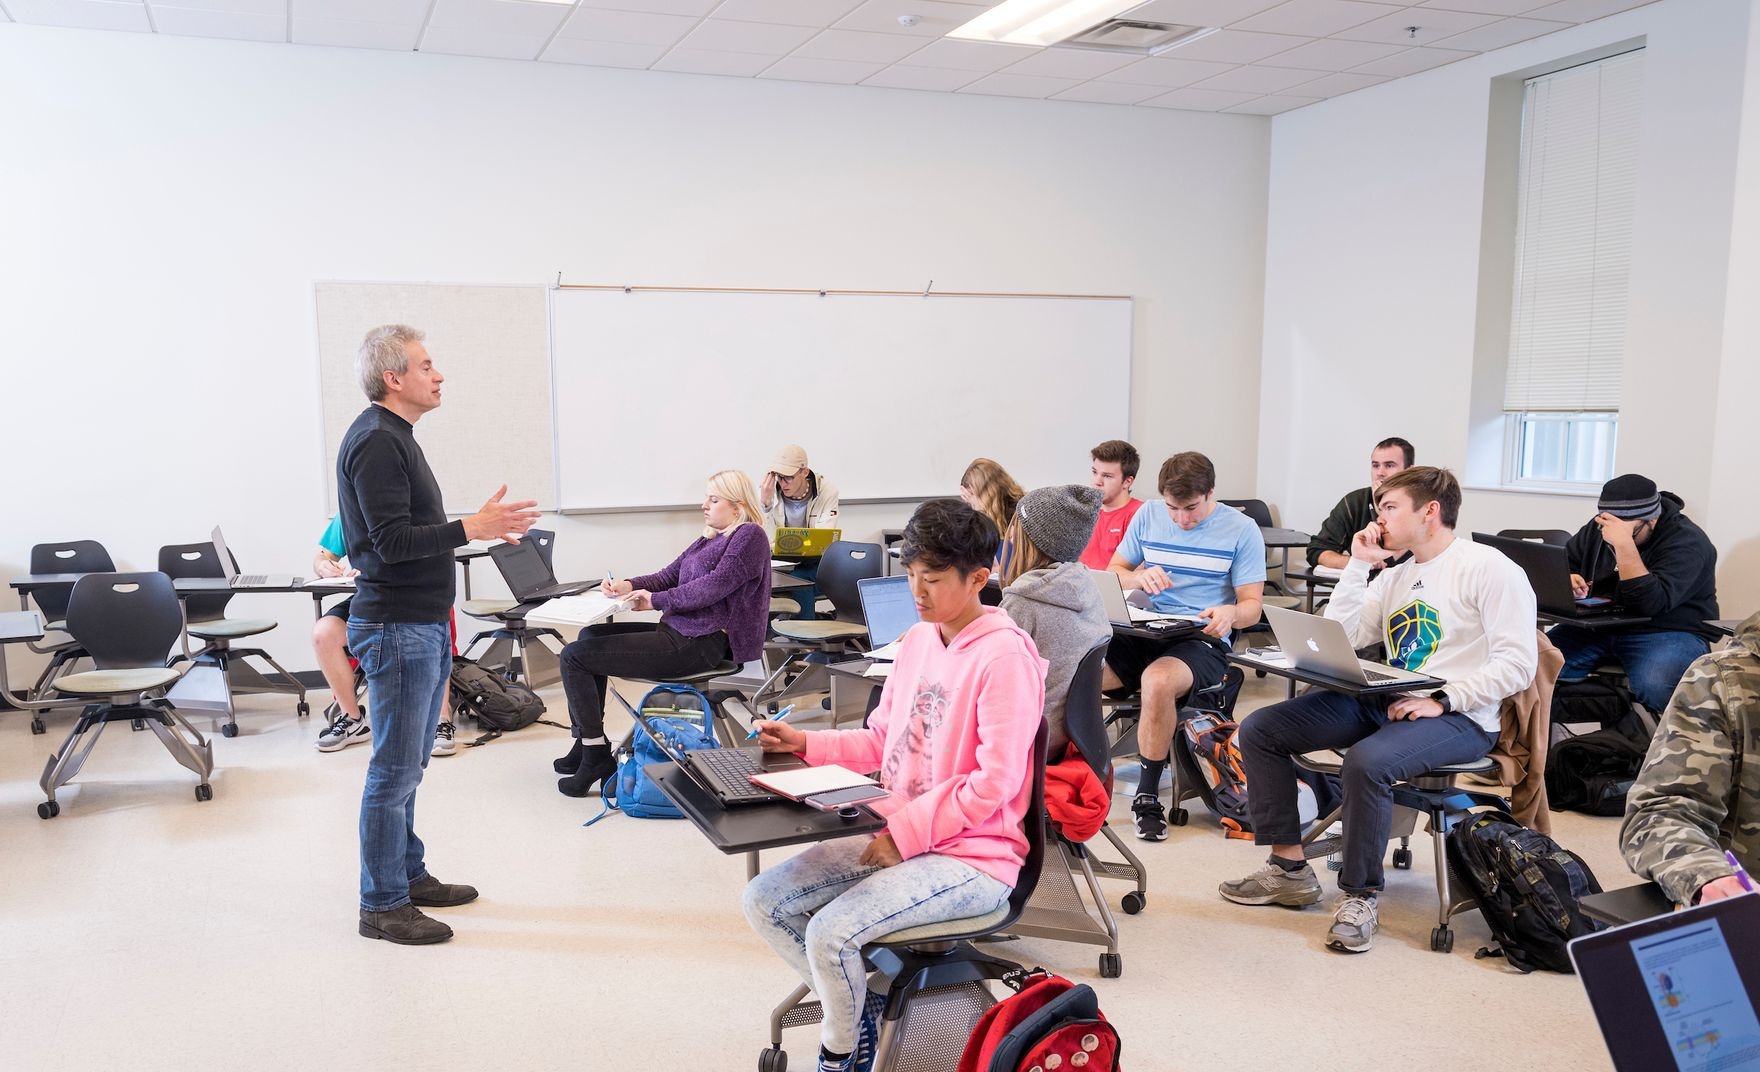  An instructor addresses a classroom full of students